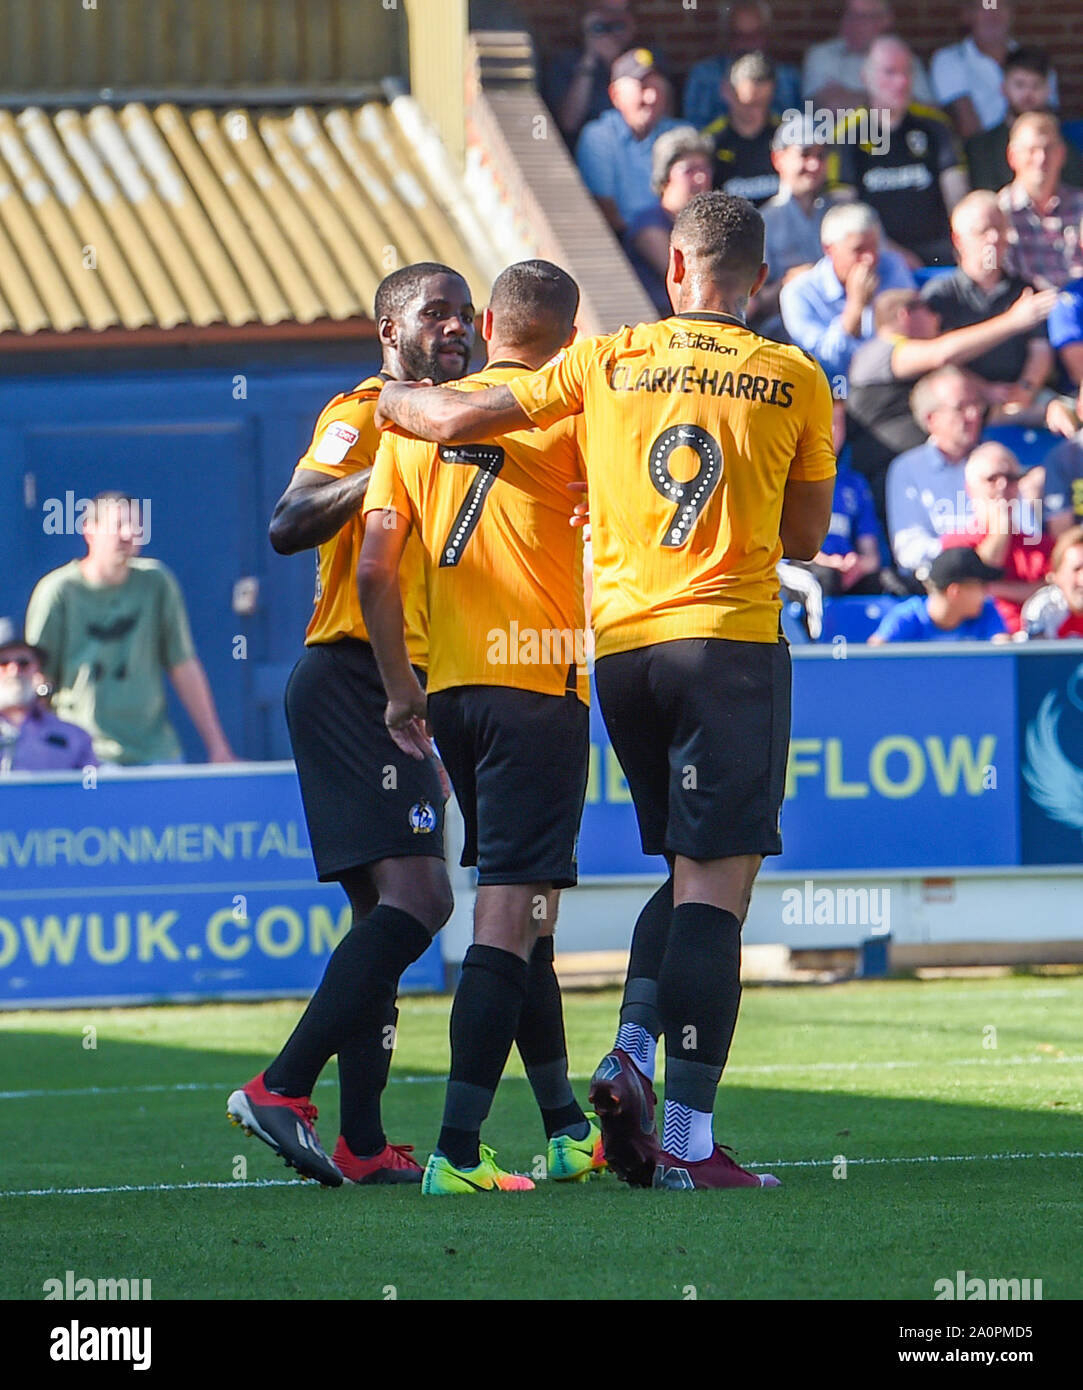 London UK 21 September 2019 - Abu Agogo of Bristol Rovers (left) is mobbed after scoring their first goal with a diving header during the Sky Bet League One football match between AFC Wimbledon and Bristol Rovers at the Cherry Red Records Stadium - Editorial use only. No merchandising. For Football images FA and Premier League restrictions apply inc. no internet/mobile usage without FAPL license - for details contact Football Dataco . Credit : Simon Dack TPI / Alamy Live News Stock Photo